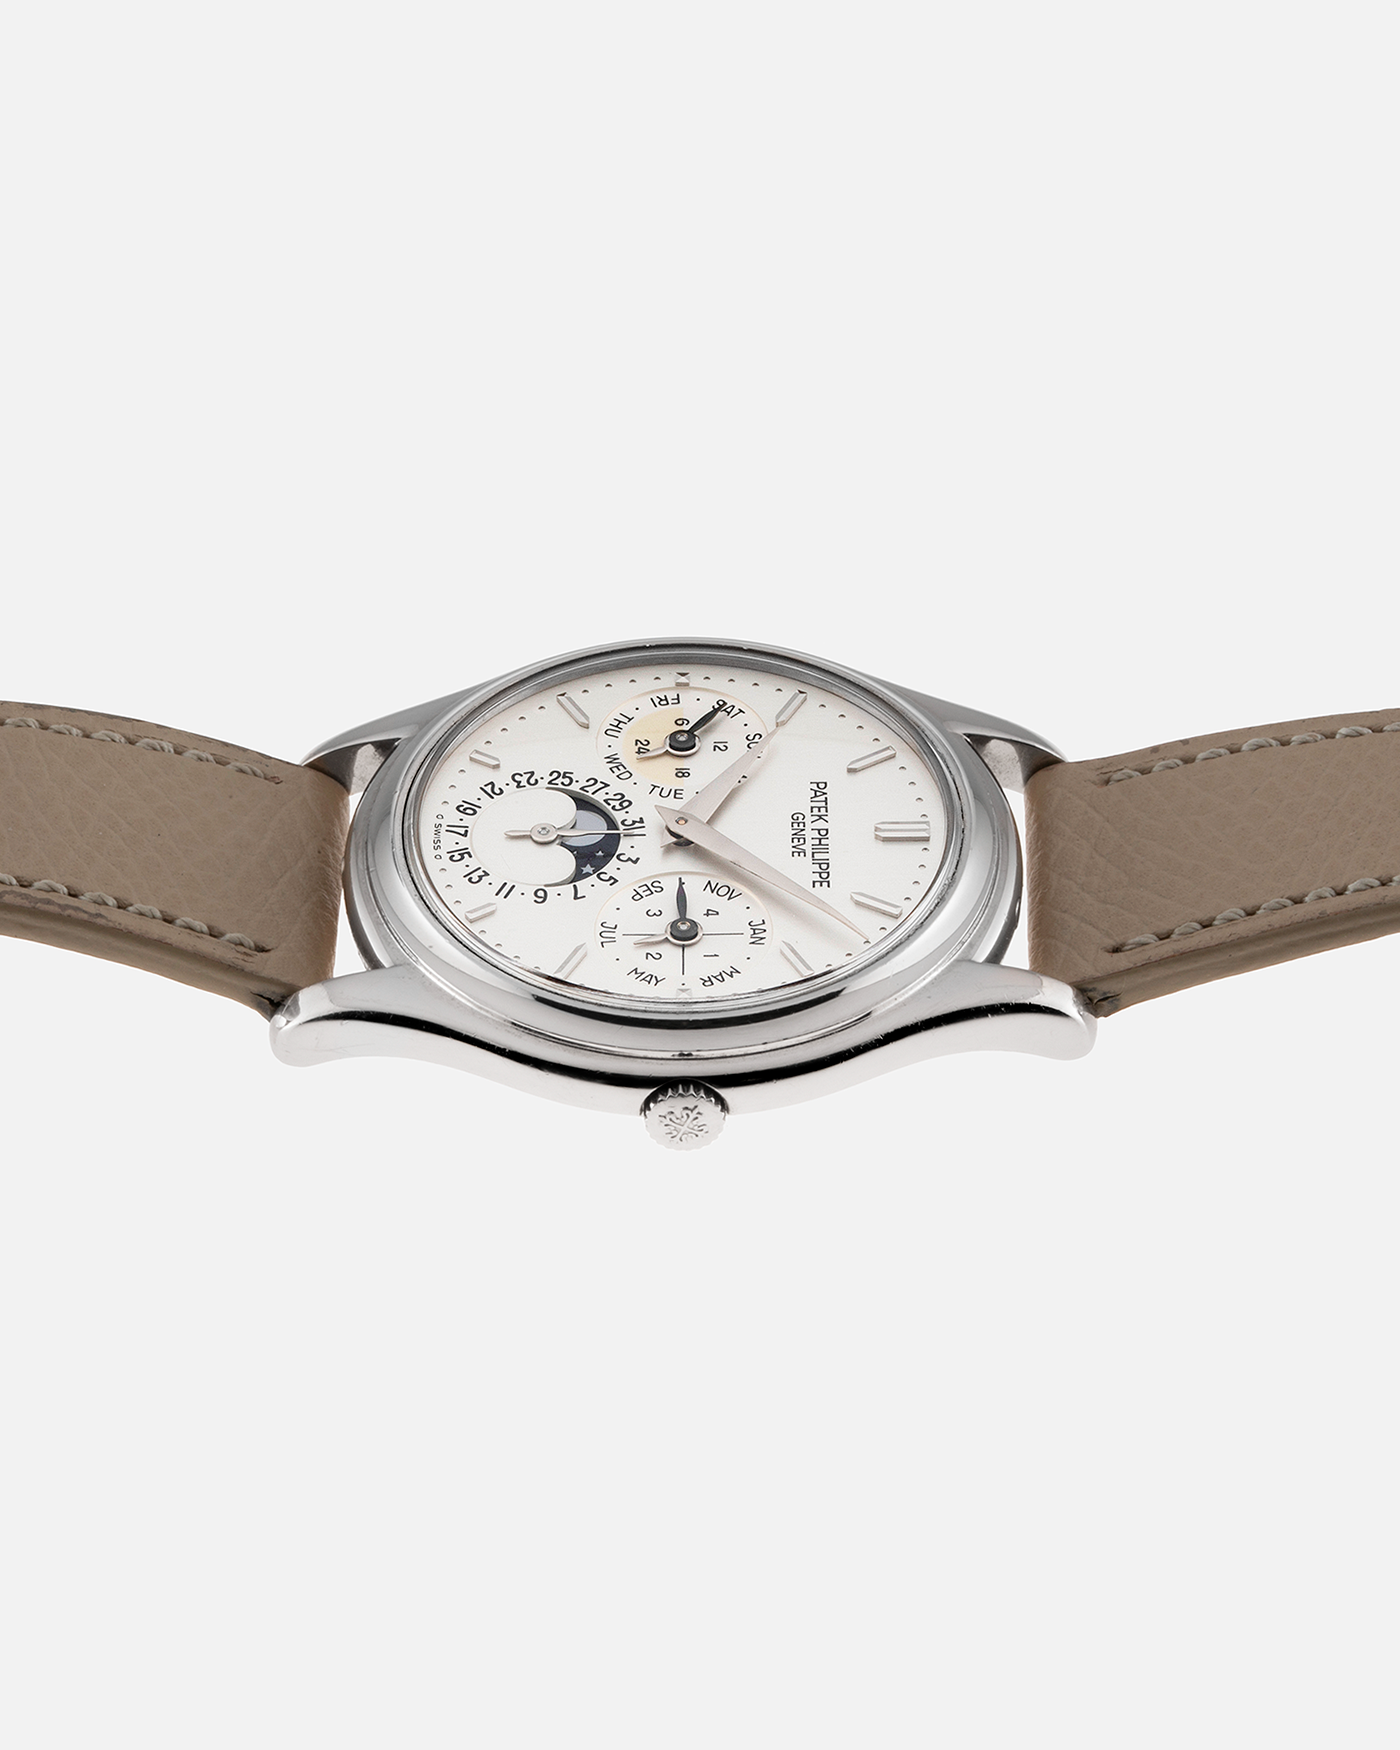 Brand: Patek Philippe Year: 1990’s Model: Perpetual Calendar Reference Number: 3940G Material: 18k White Gold Movement: Cal 240Q Case Diameter: 36mm Bracelet: Taupe Calf Leather Strap and 18k White Gold Patek Philippe Tang Buckle